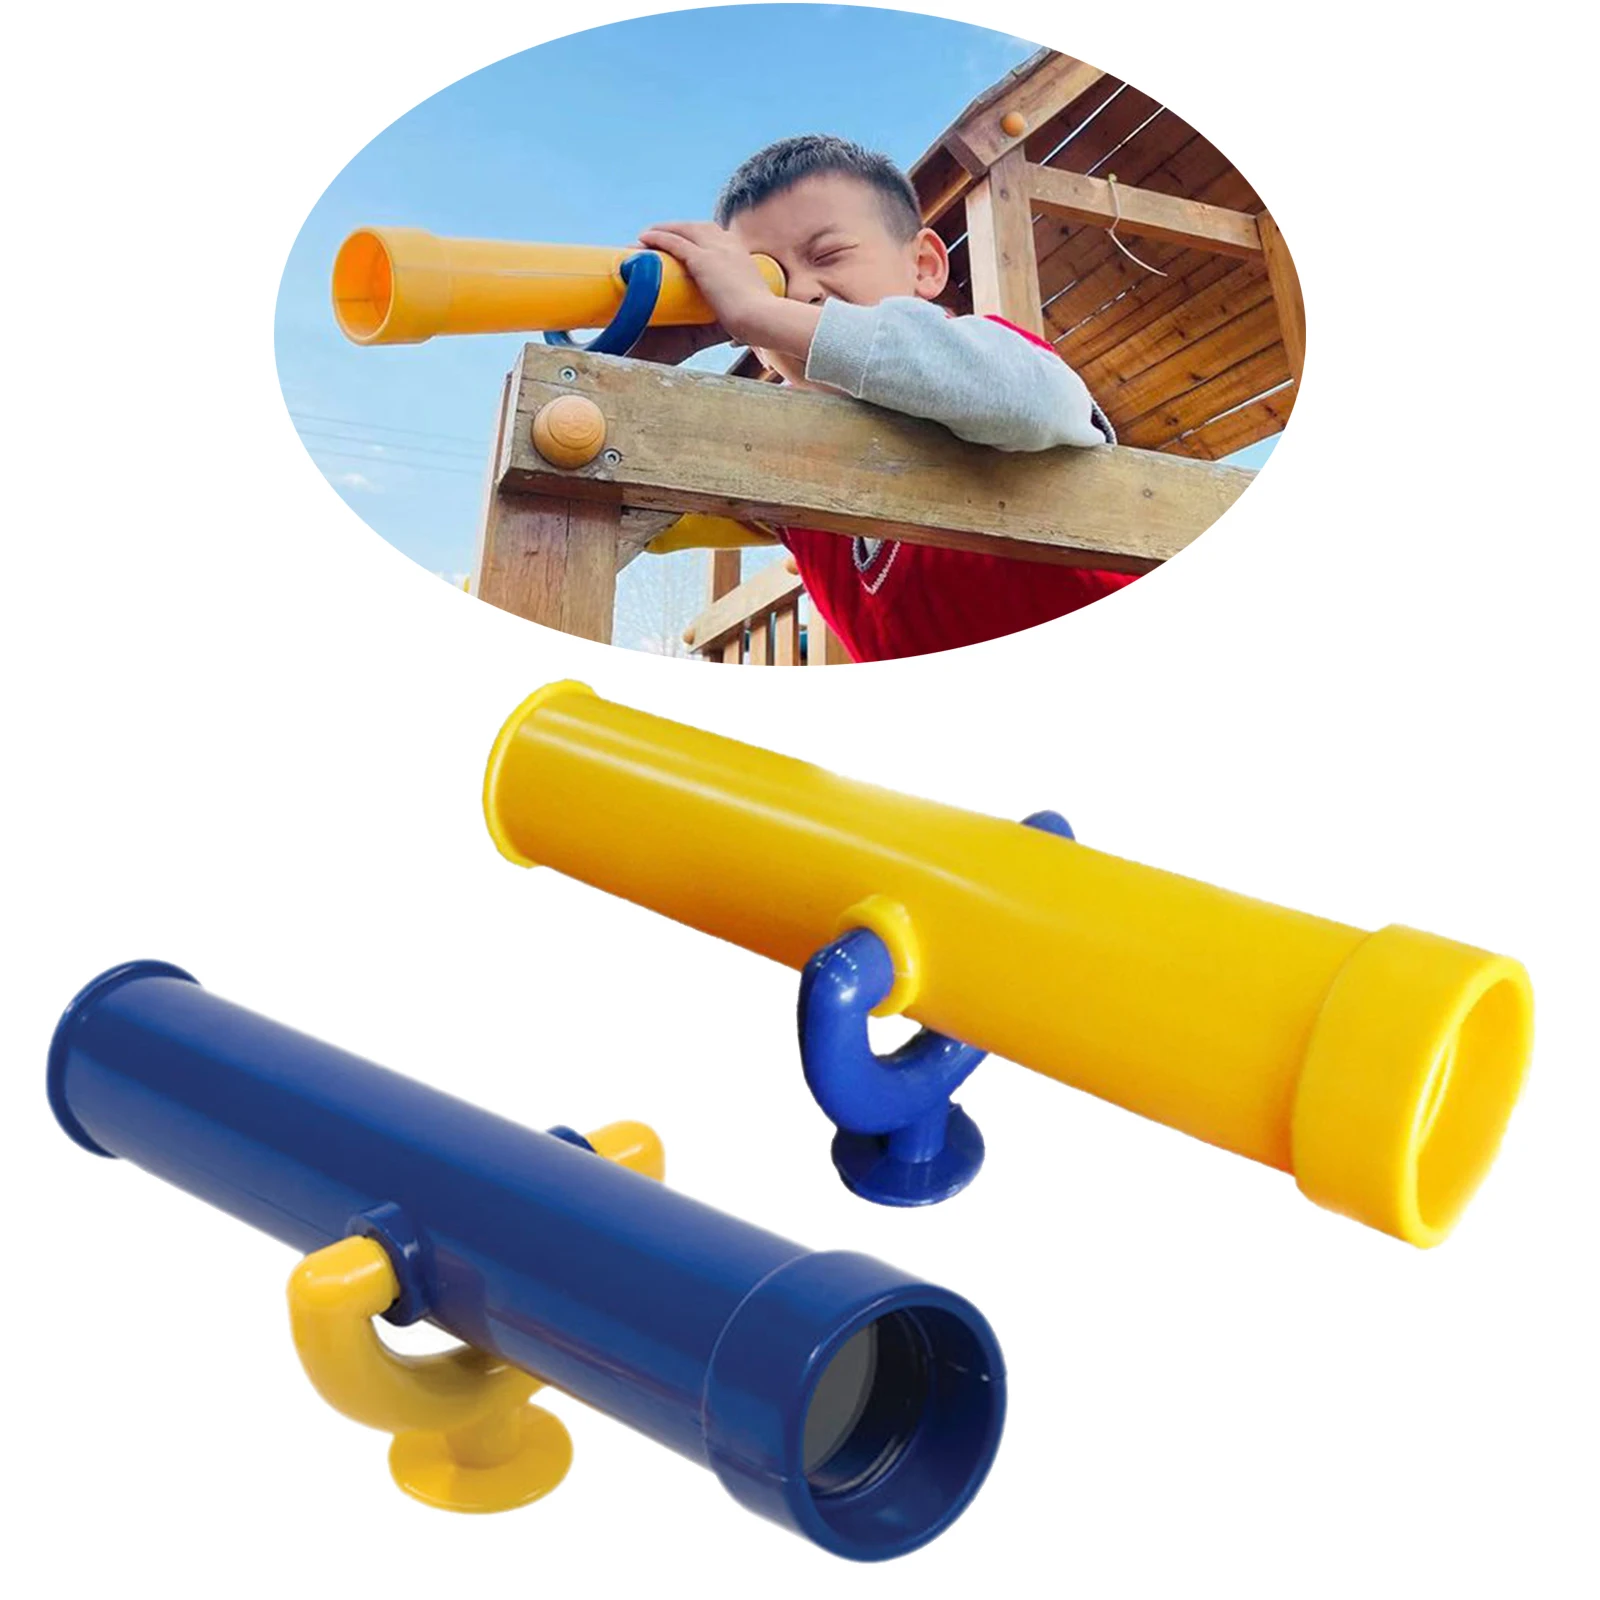 Kids Playground Monocular Pirate Telescope Plastic Pretend Toy for Boys Girls Interactive Learning Ages 3+